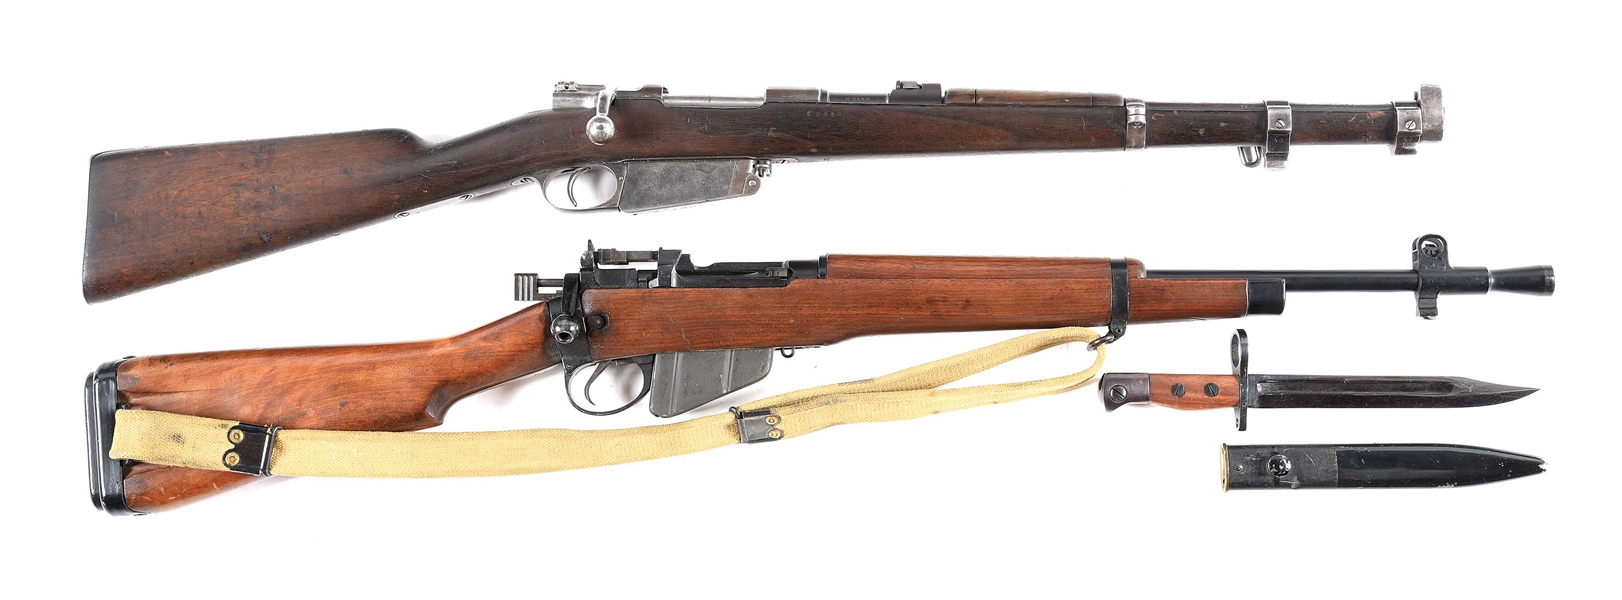 (C) LOT OF TWO: MAUSER ARGENTINE MODEL 1891 ENGINEERS CARBINE AND FAZAKERLEY NO. 5 MK I BOLT ACTION CARBINES.